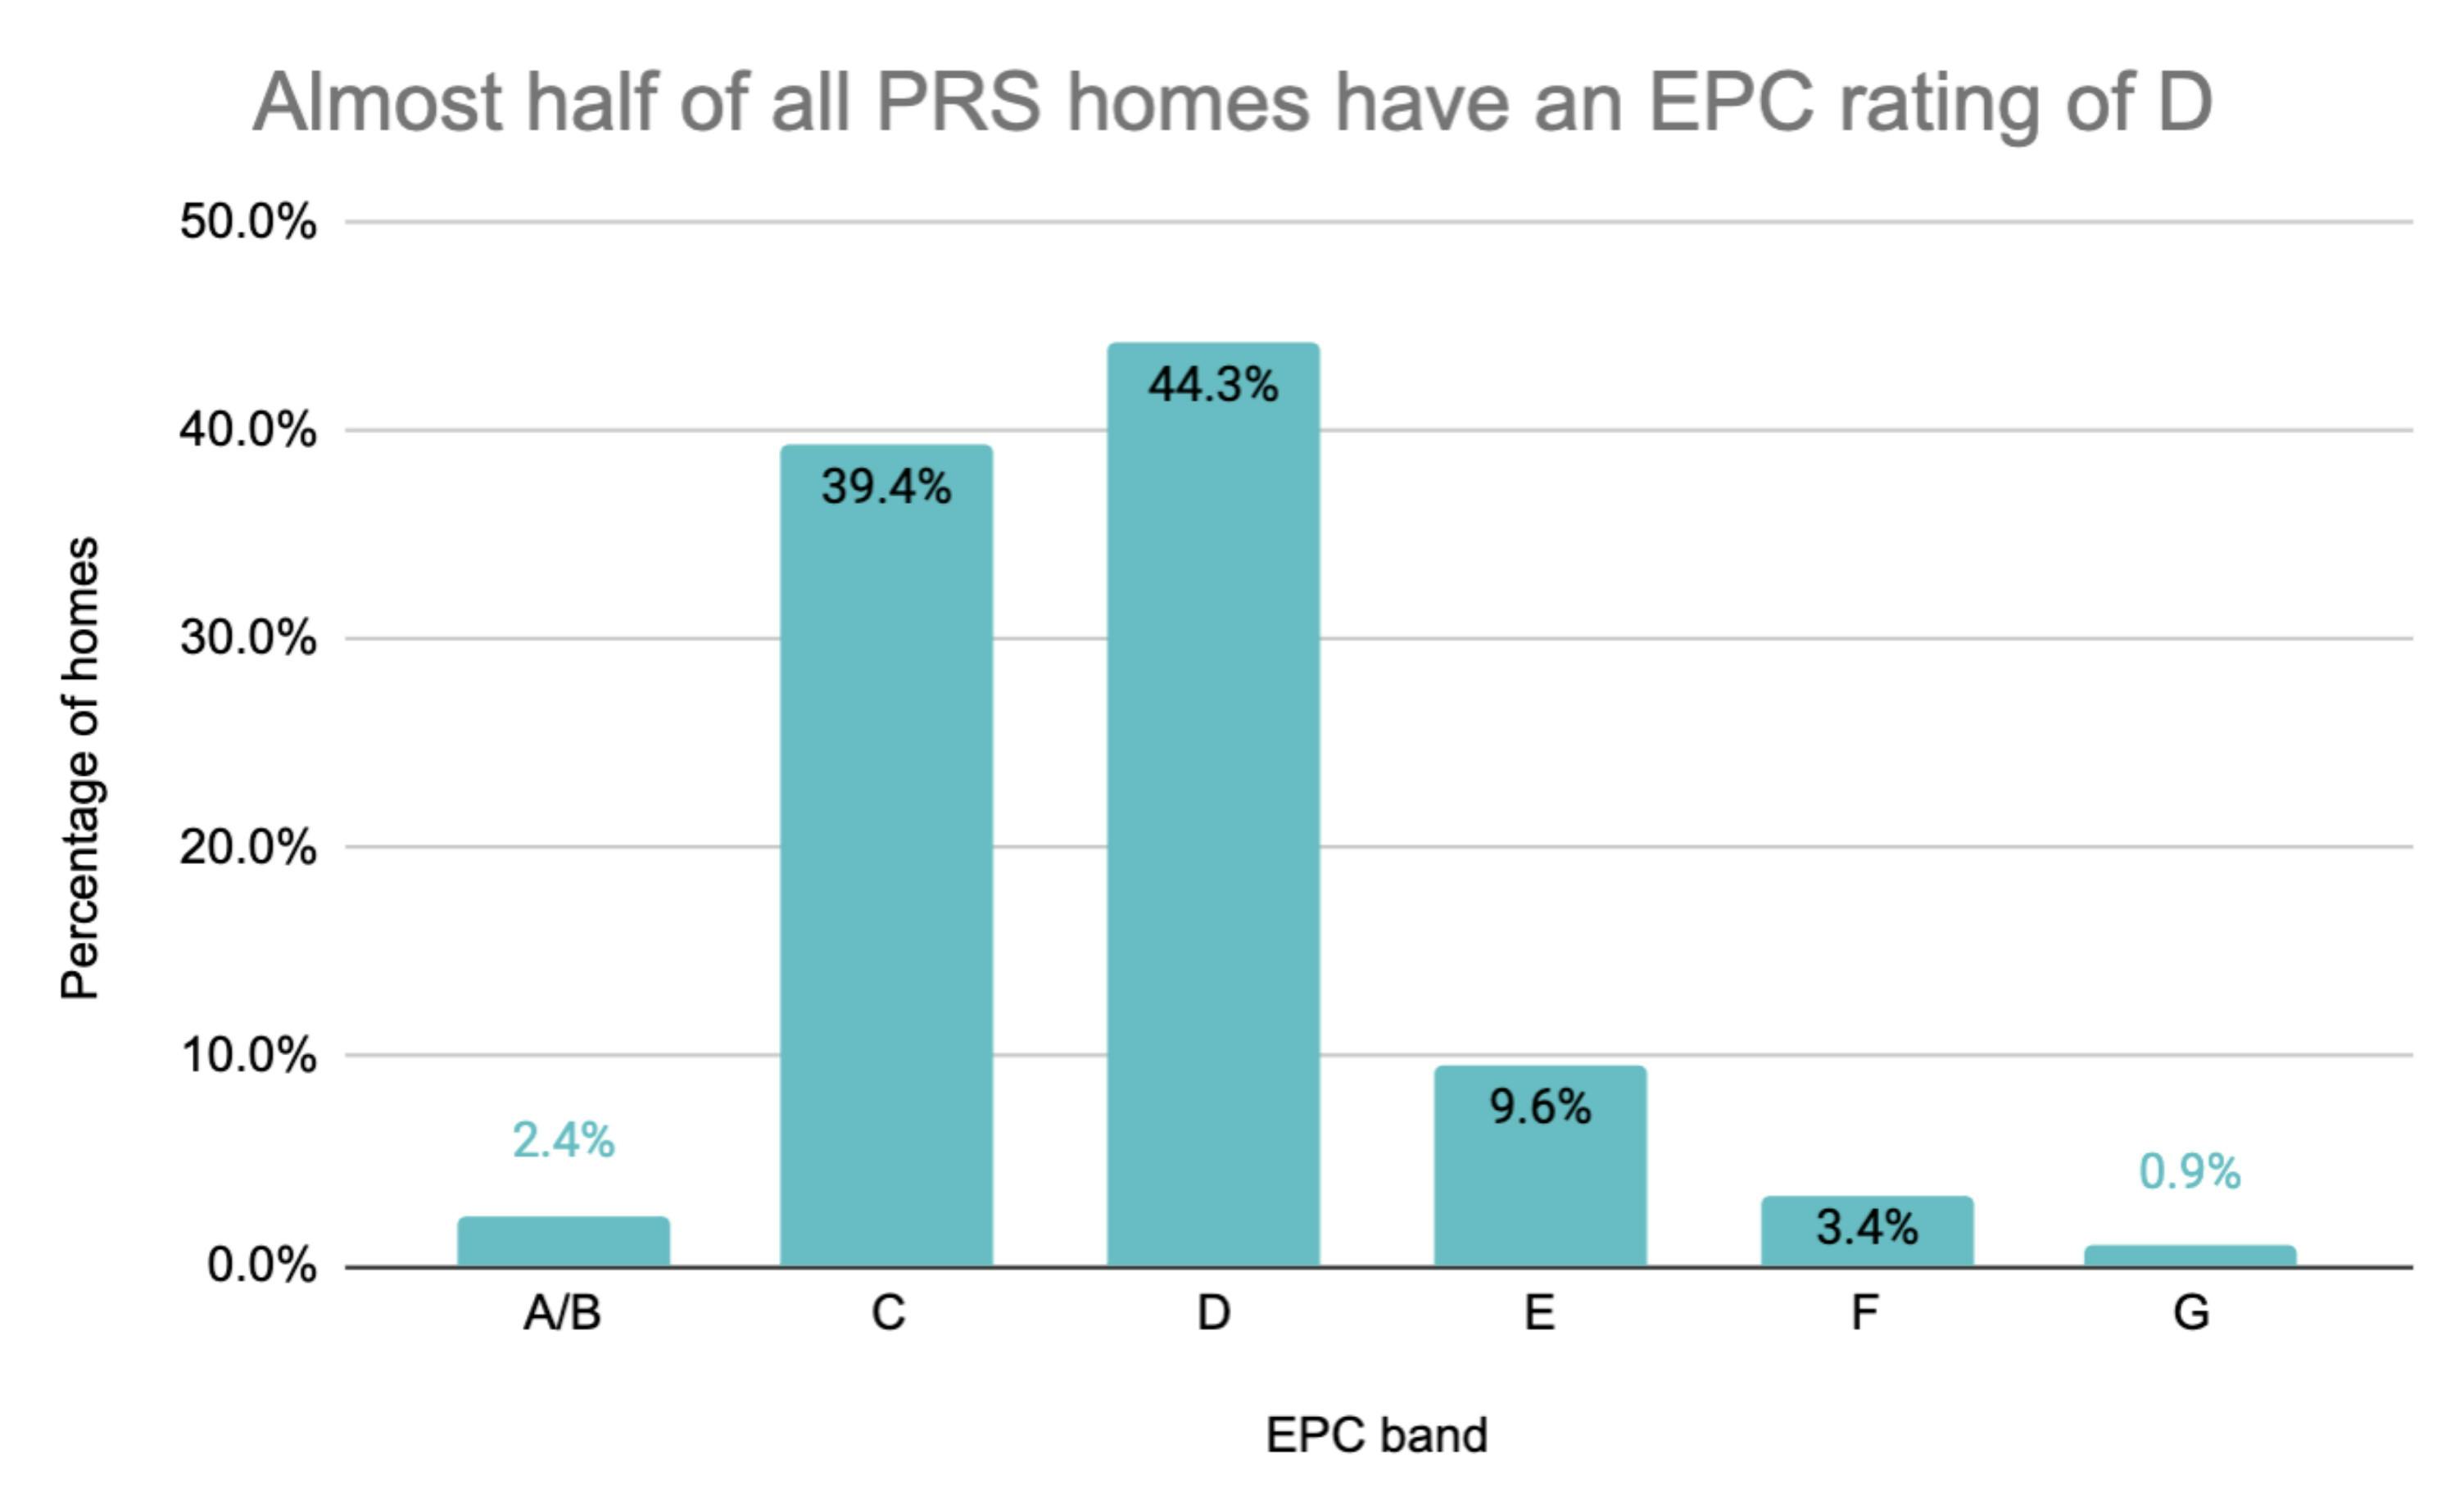 Almost half of all PRS homes have an EPC rating of D